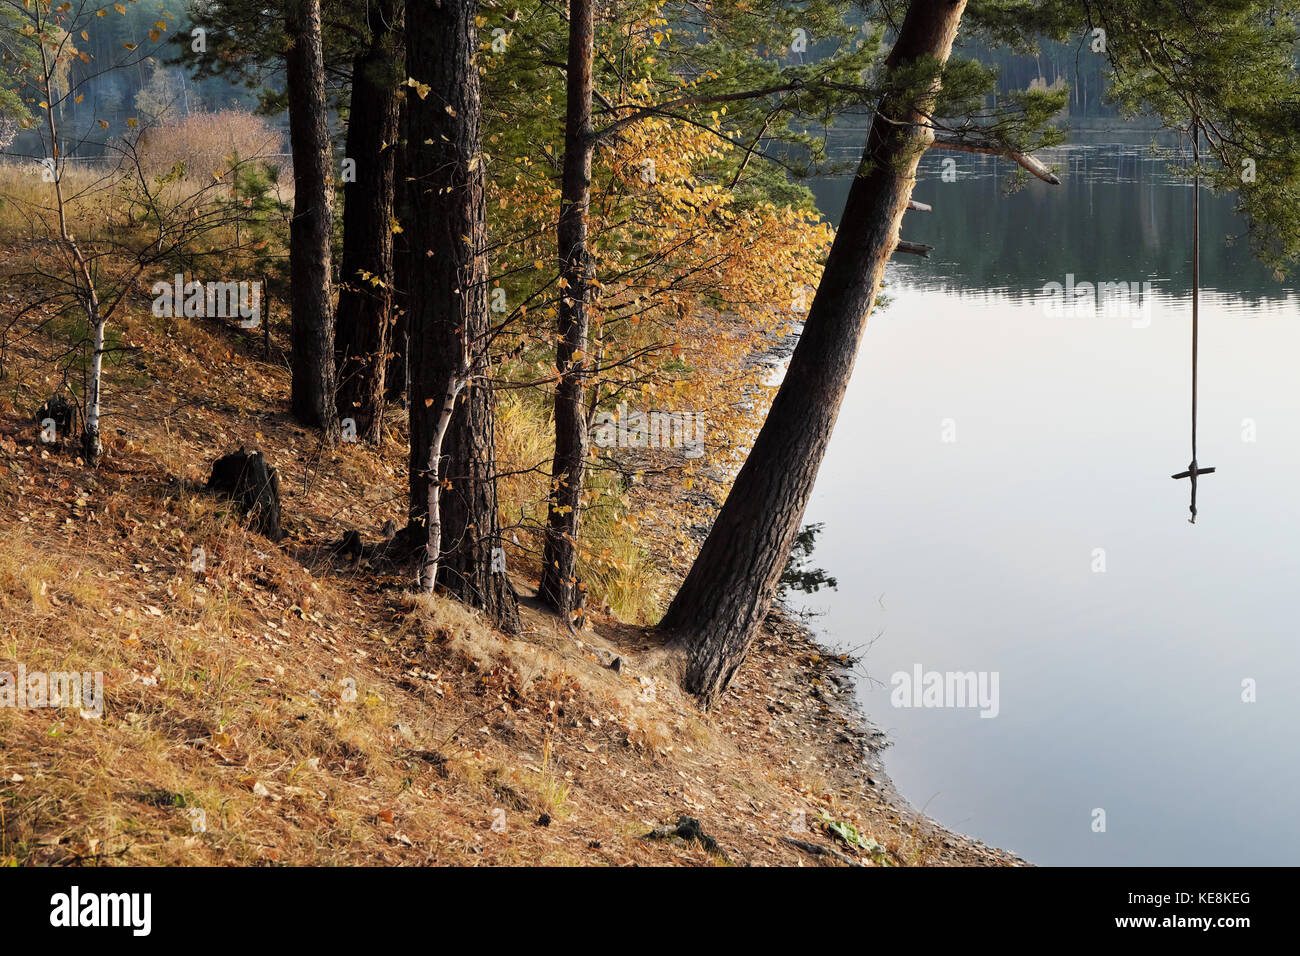 The shore of the forest lake in the autumn with a tarsar for jumping into the water Stock Photo